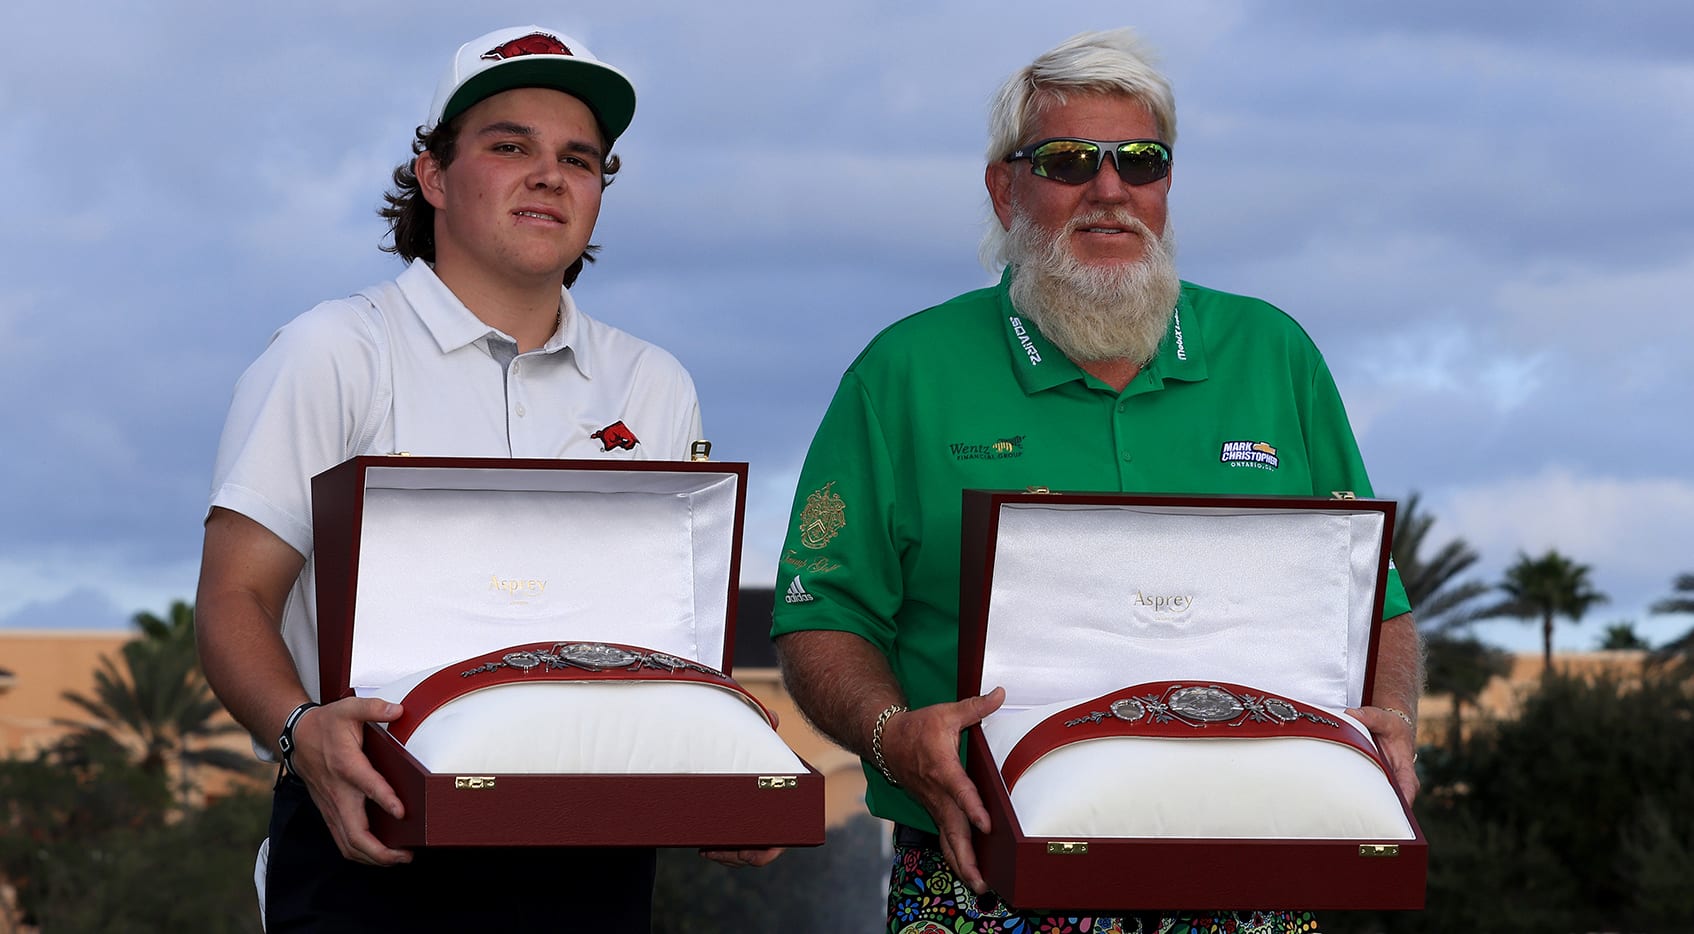 Team Woods eleven straight birdies fall short of John Daly and son